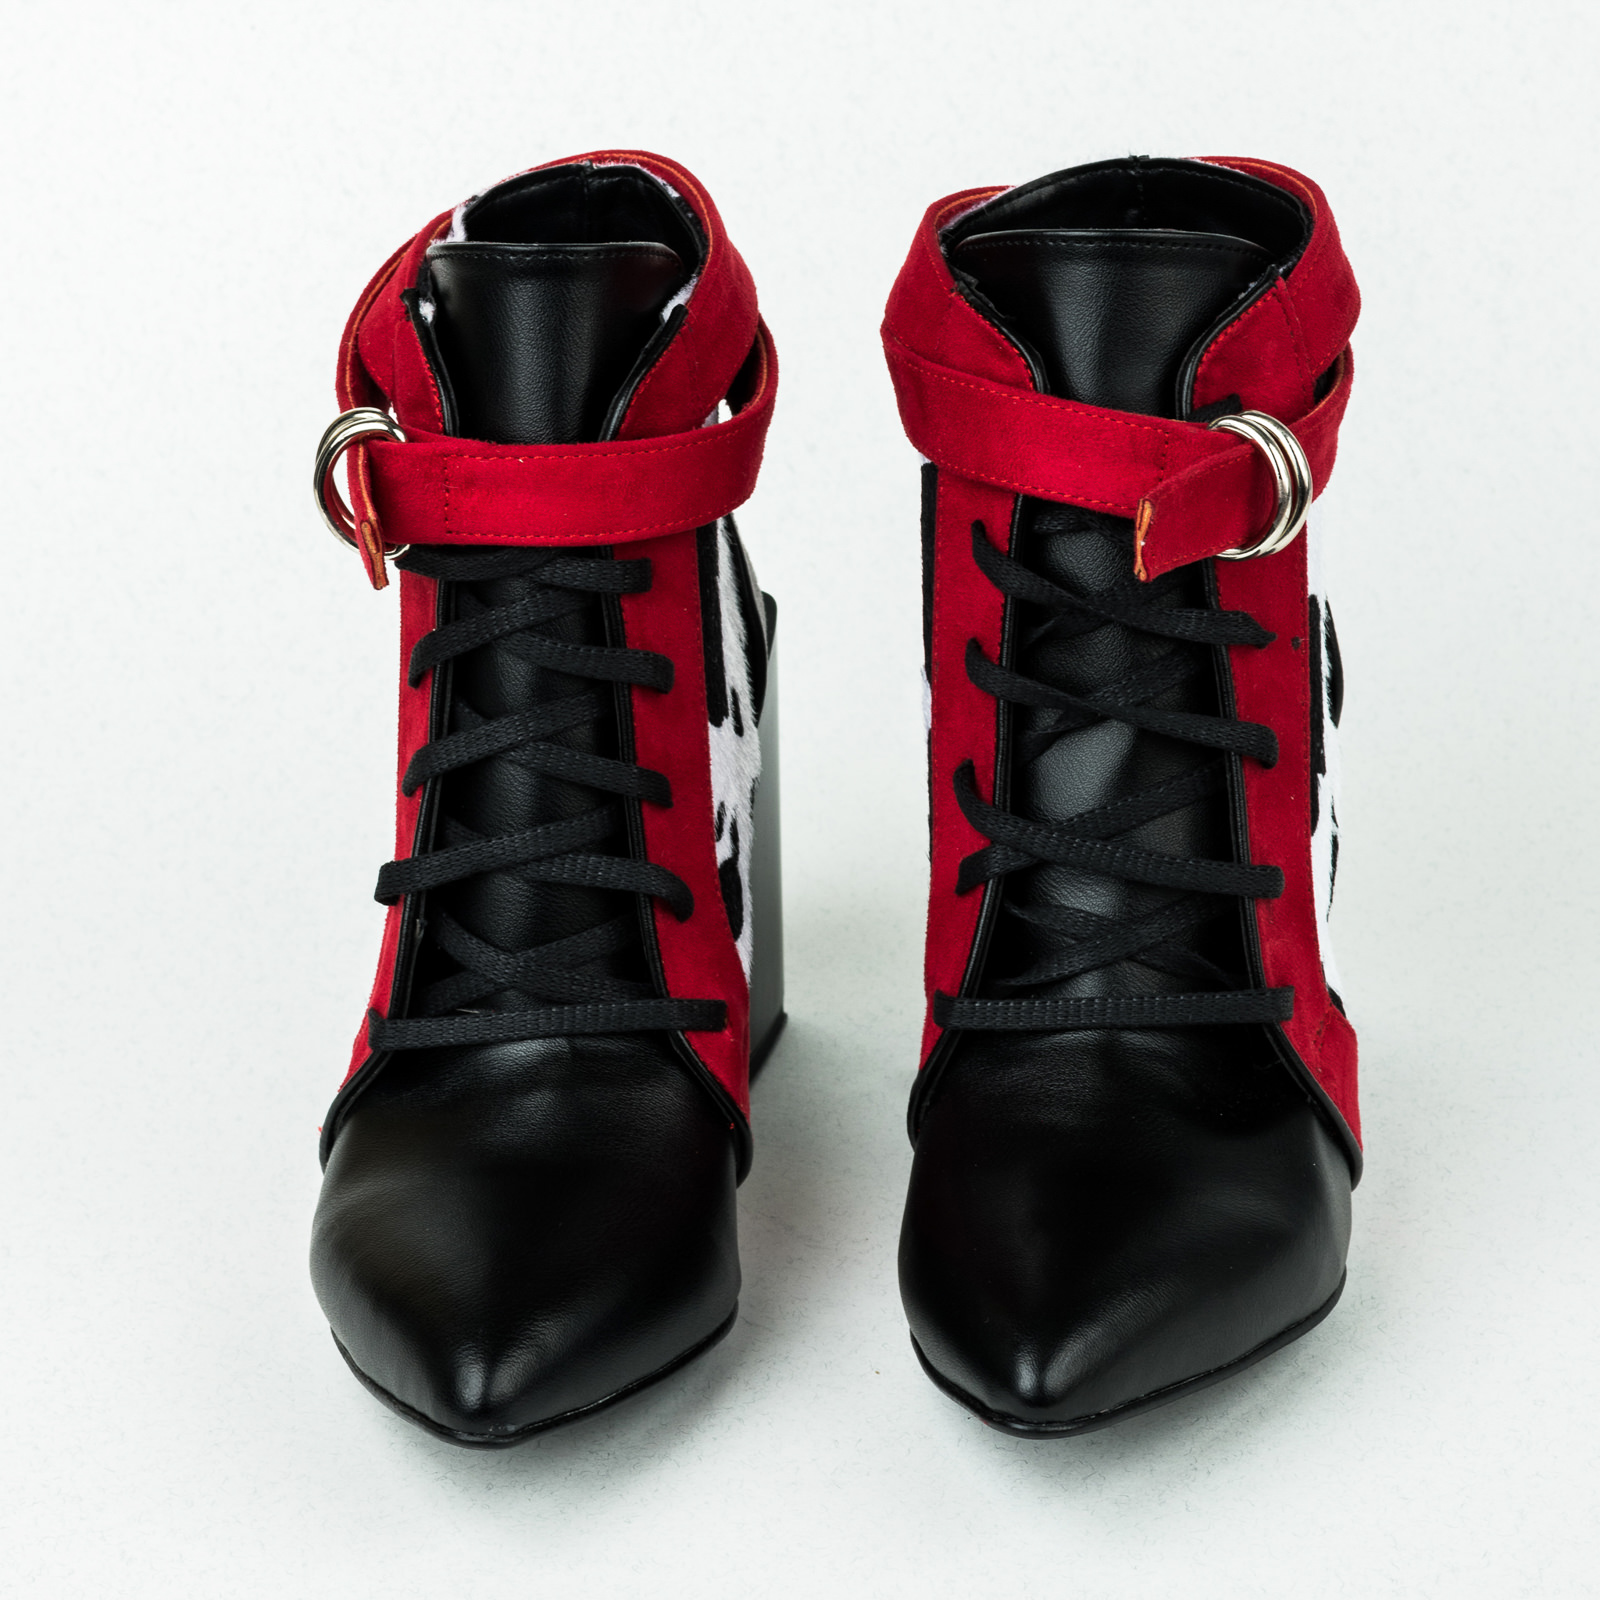 Women ankle boots B044 - RED